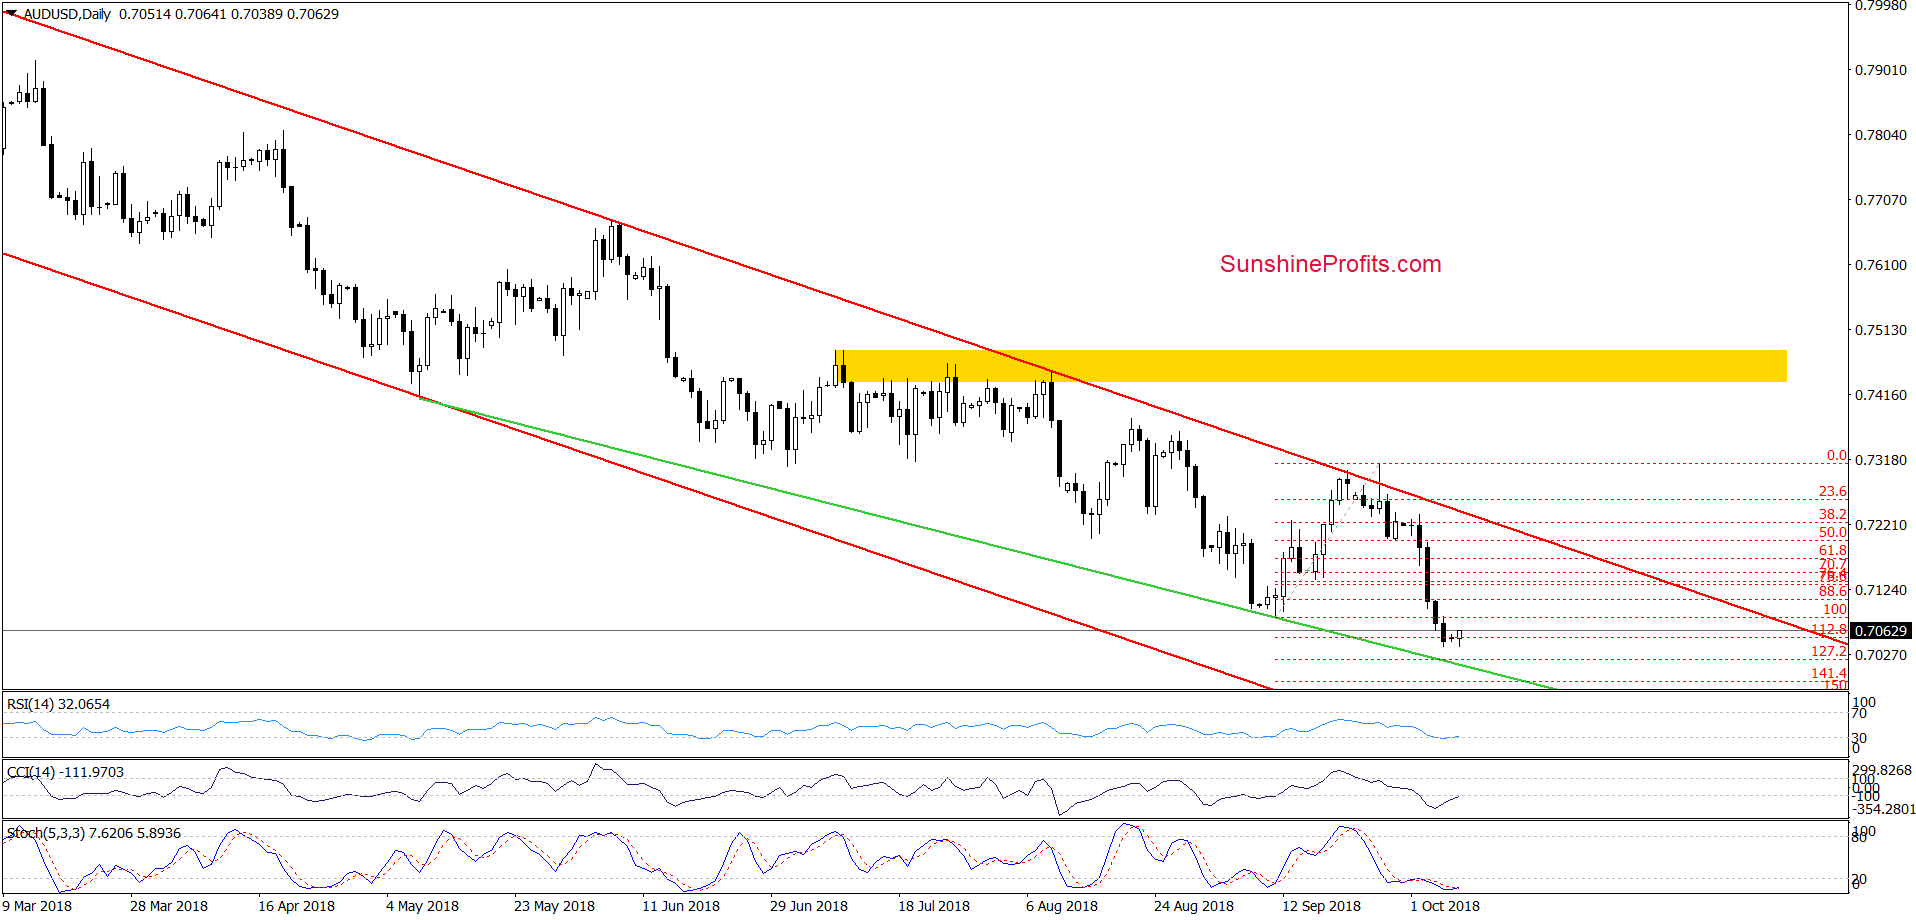 AUD/USD - daily chart